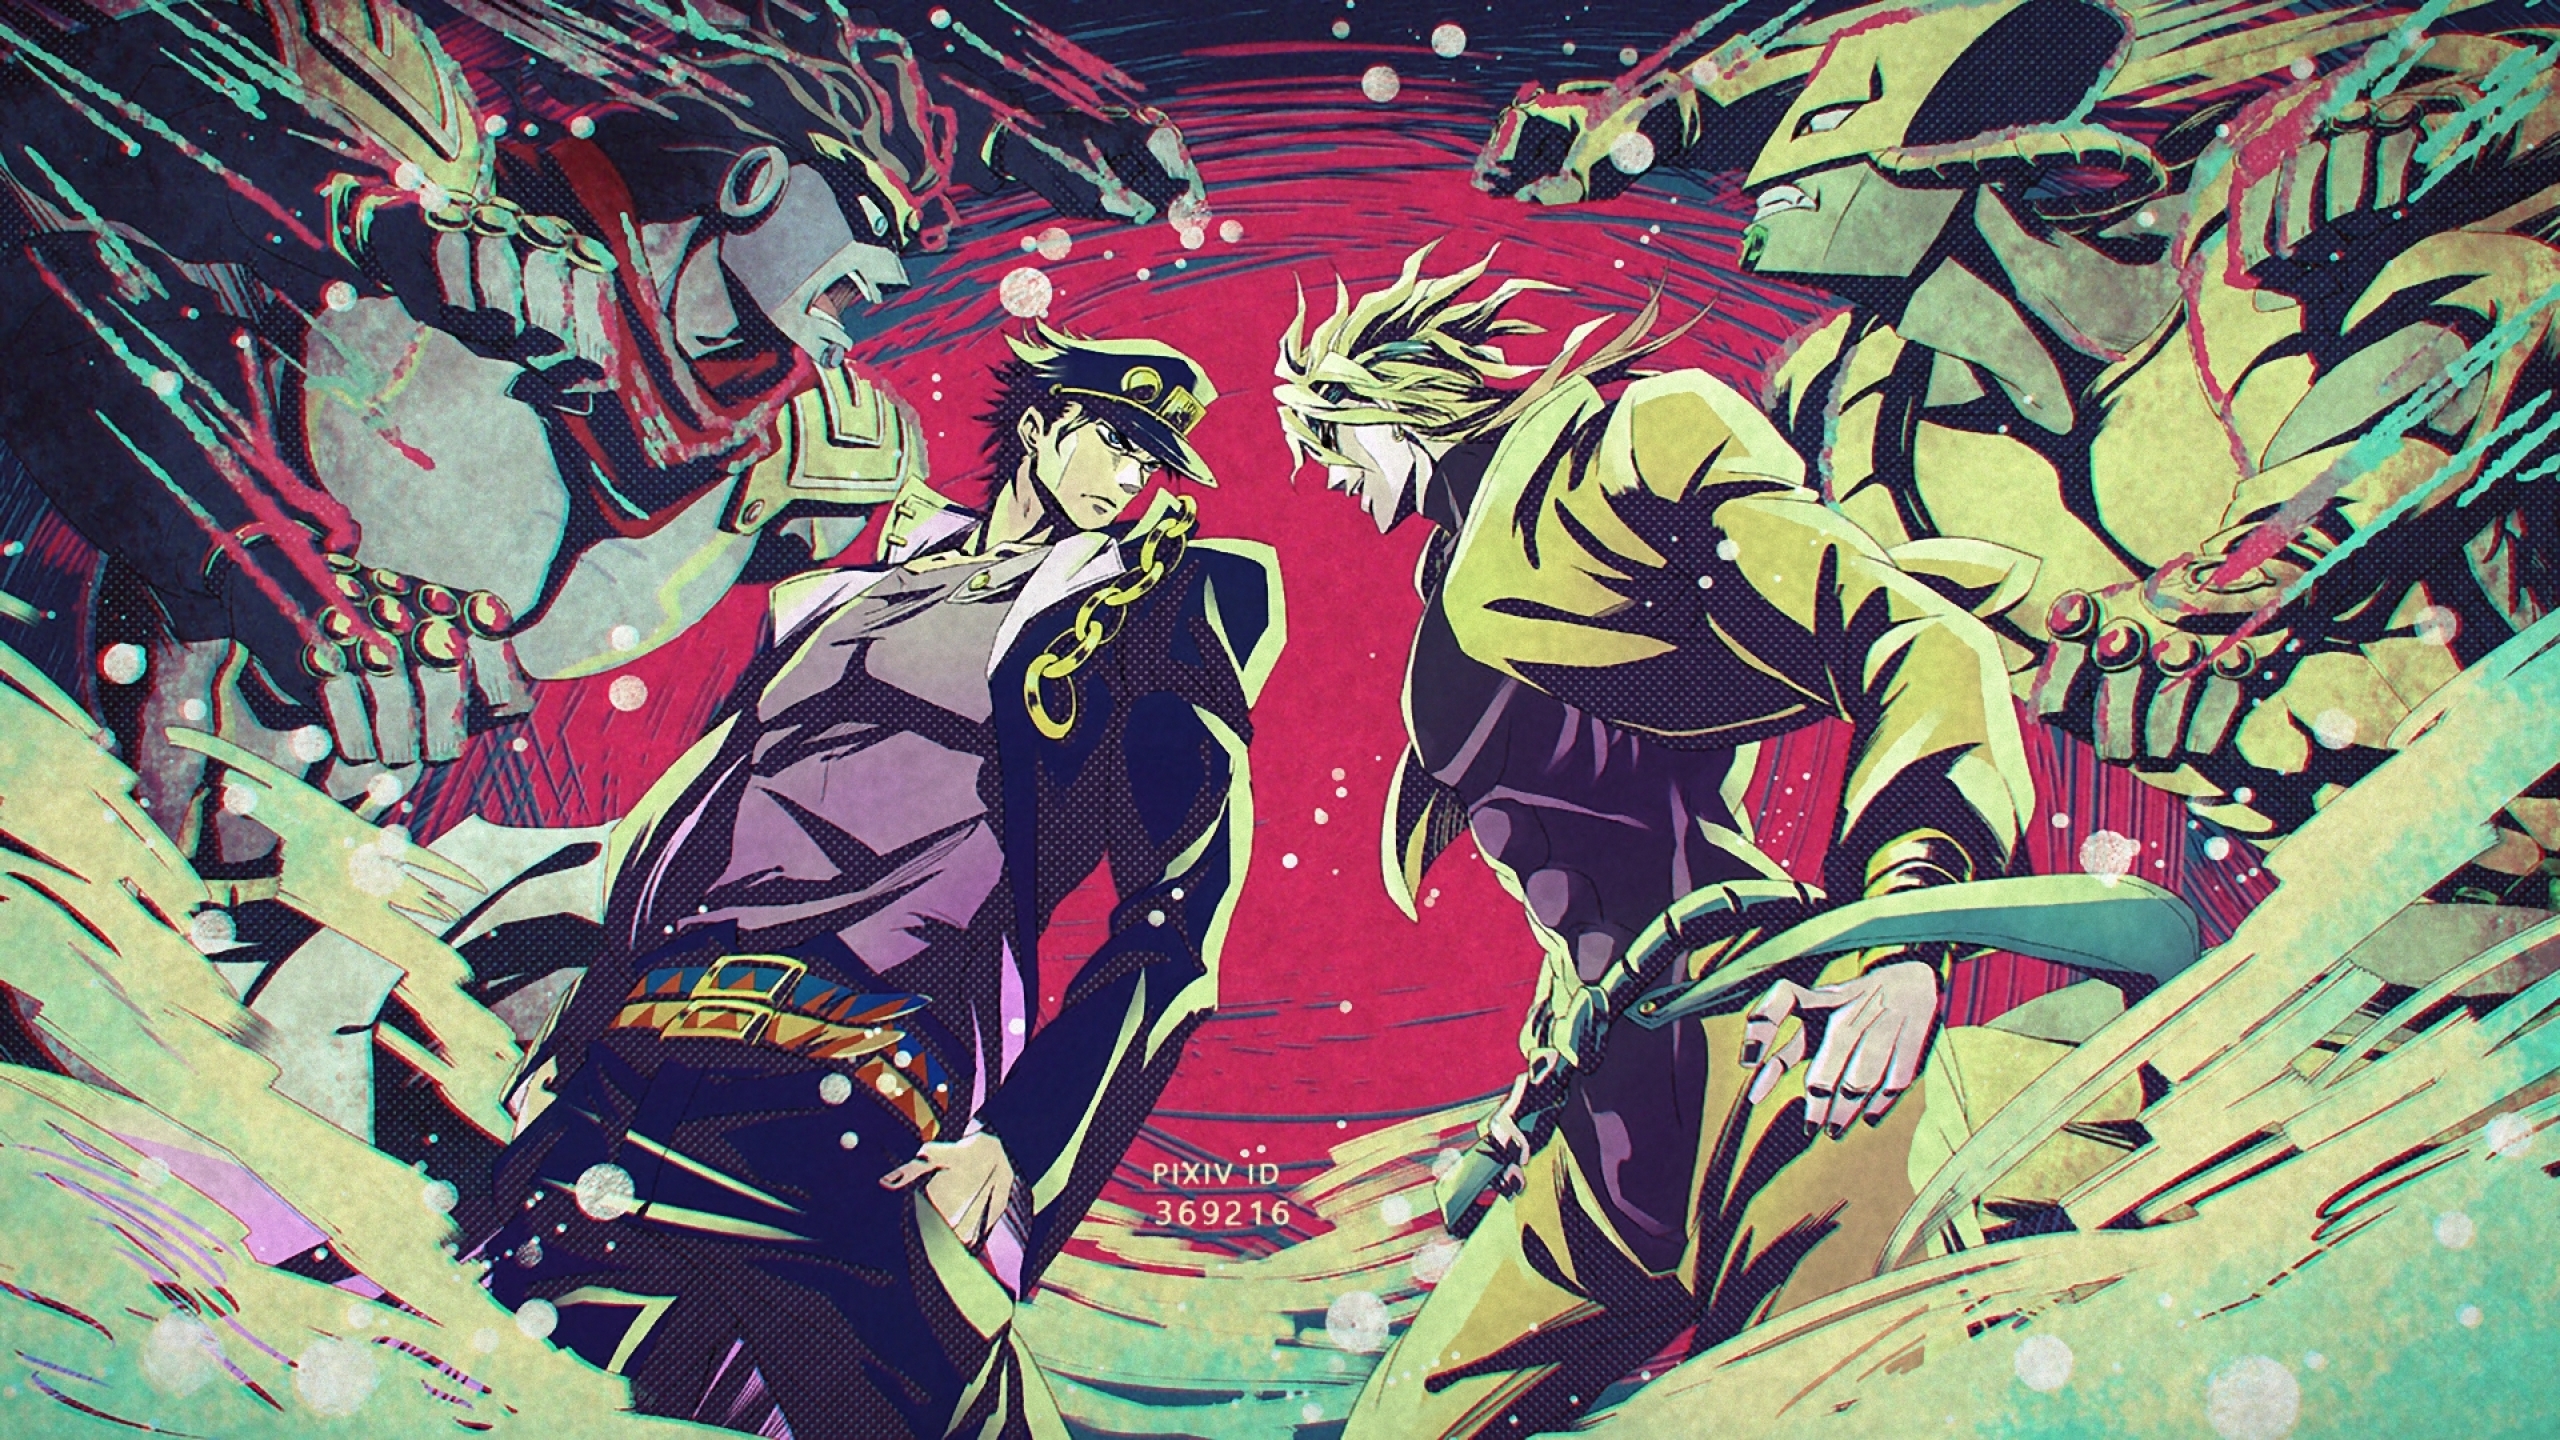 2560x1440 Jojo S Bizarre Adventure Stardust Crusaders 1440p Resolution Wallpaper Hd Anime 4k Wallpapers Images Photos And Background